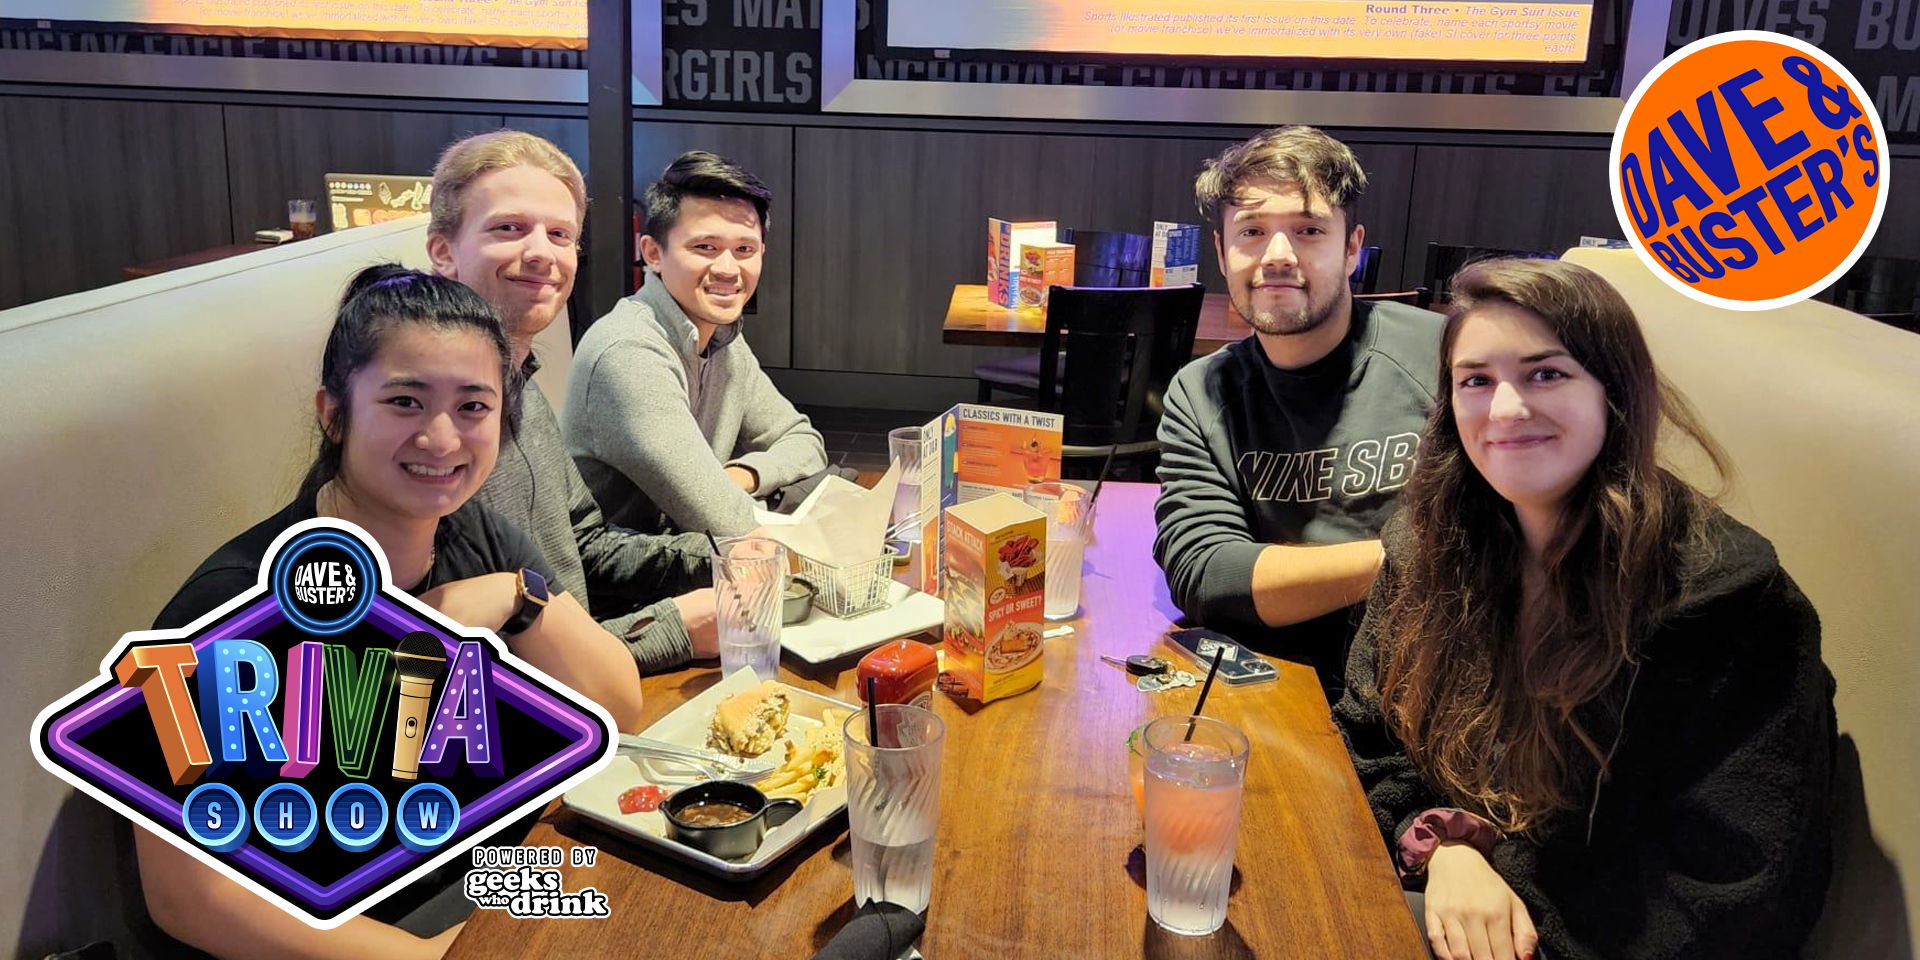 Geeks Who Drink Trivia Night at Dave and Buster's - Anchorage promotional image